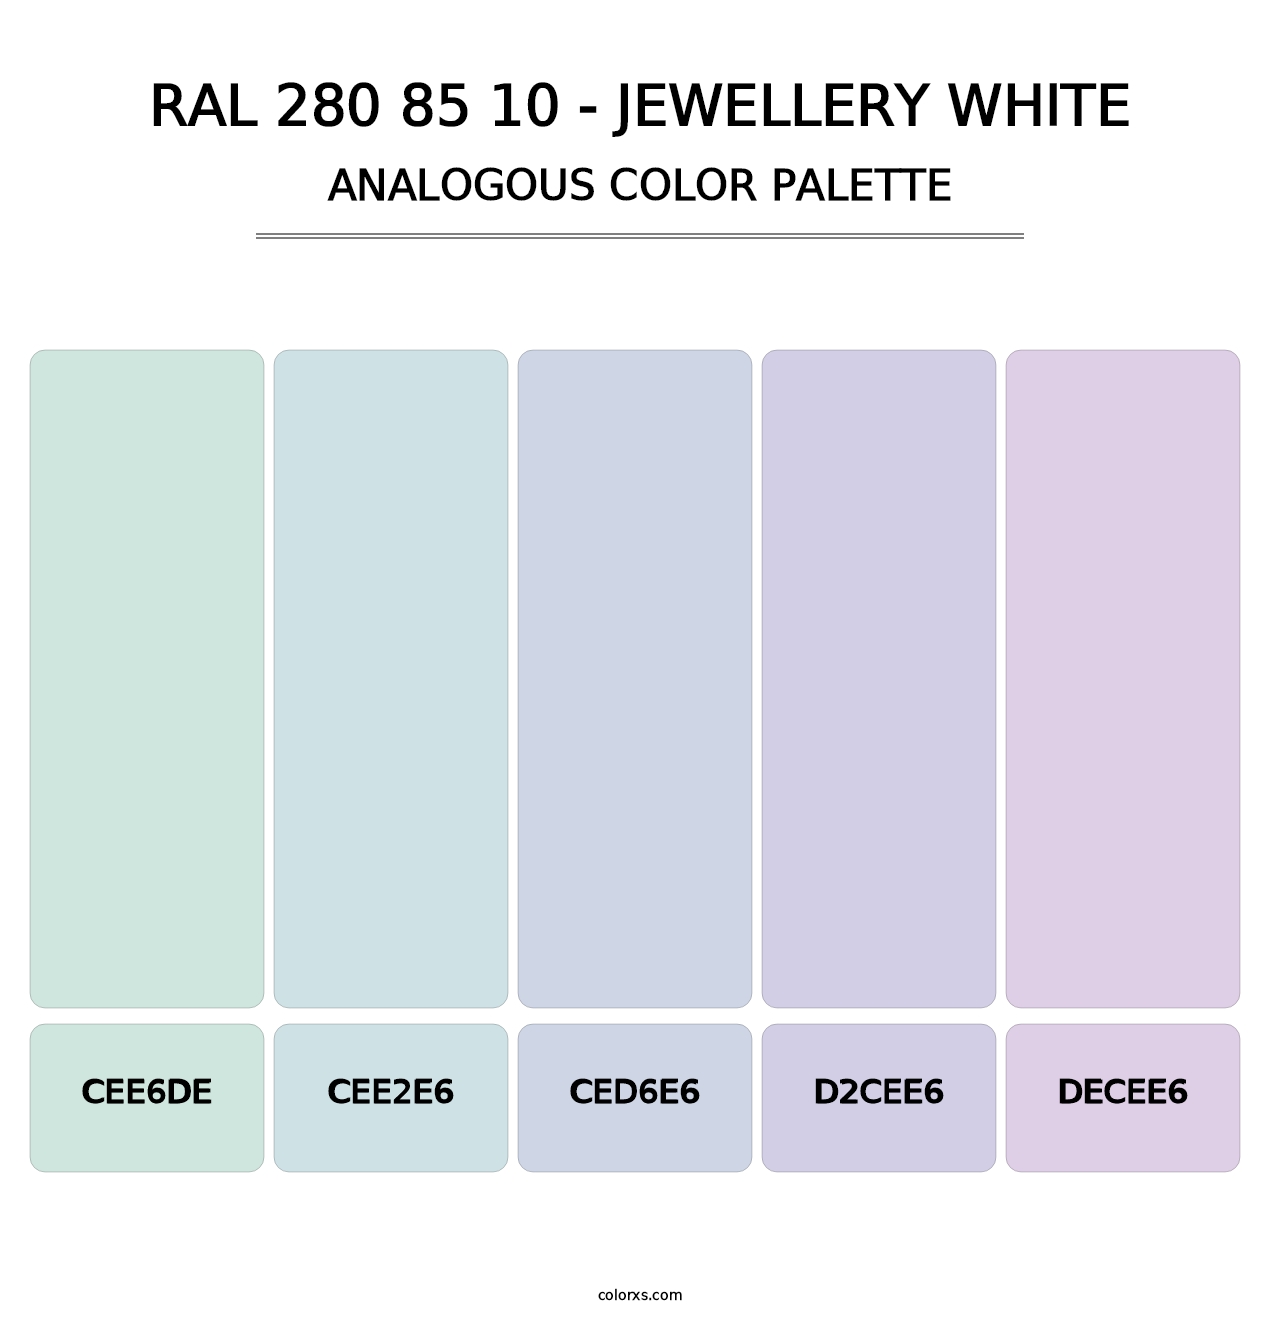 RAL 280 85 10 - Jewellery White - Analogous Color Palette